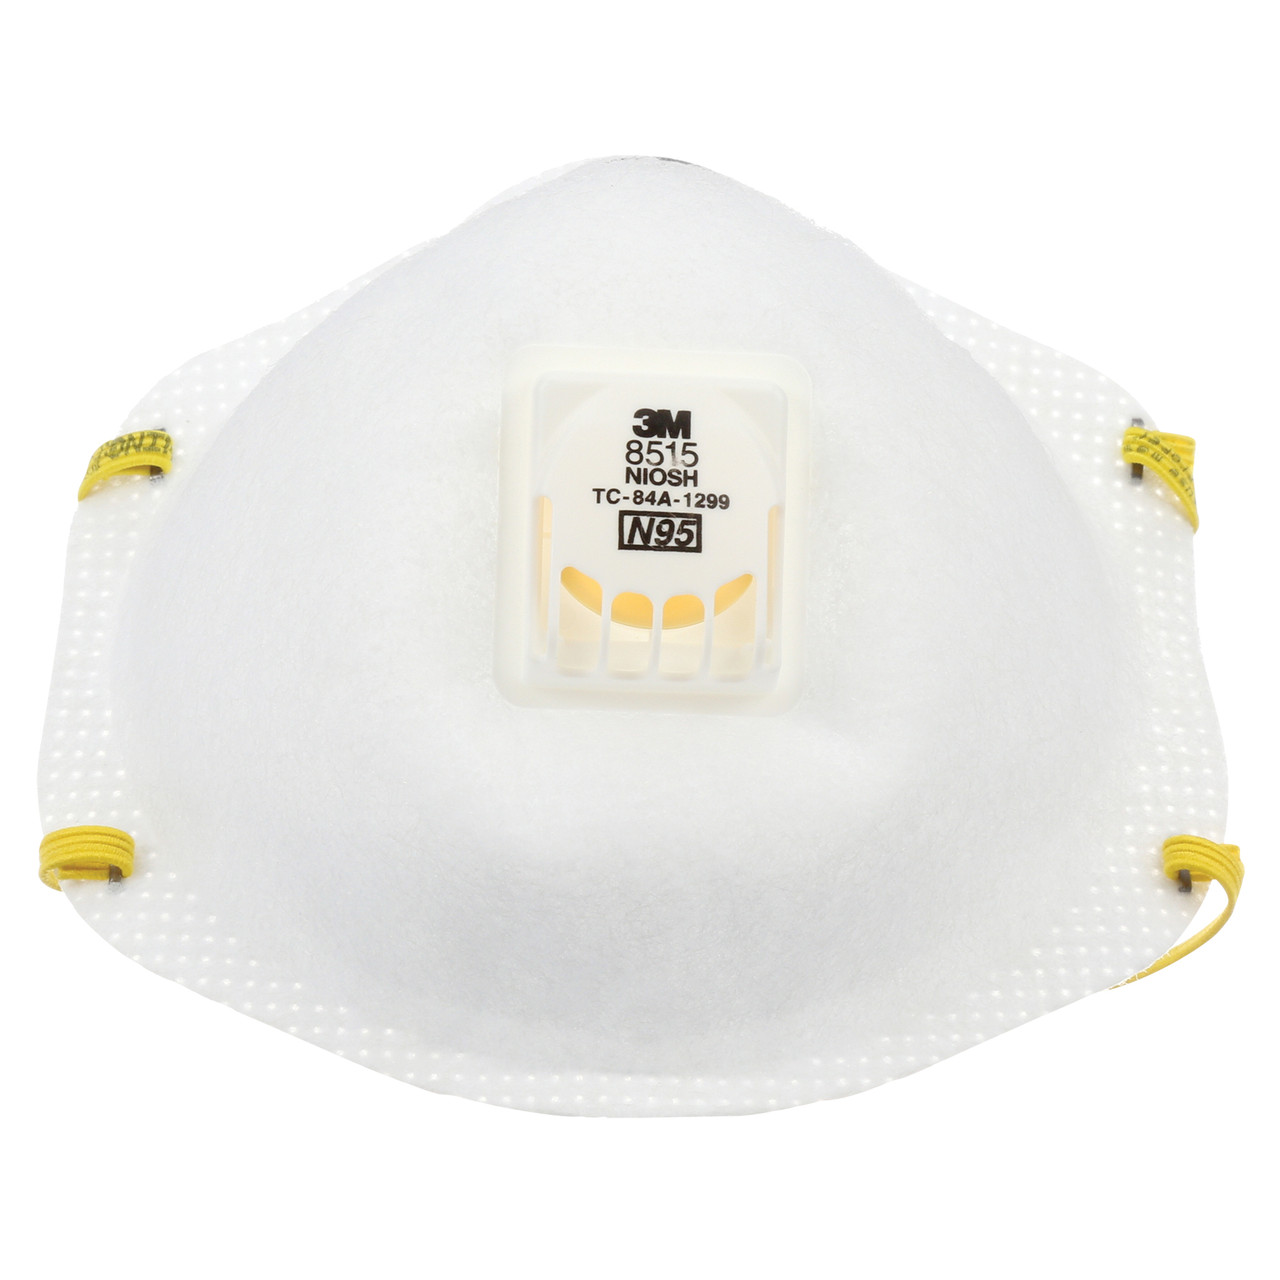 N95 3M® Vented Particulate Respirator  8515